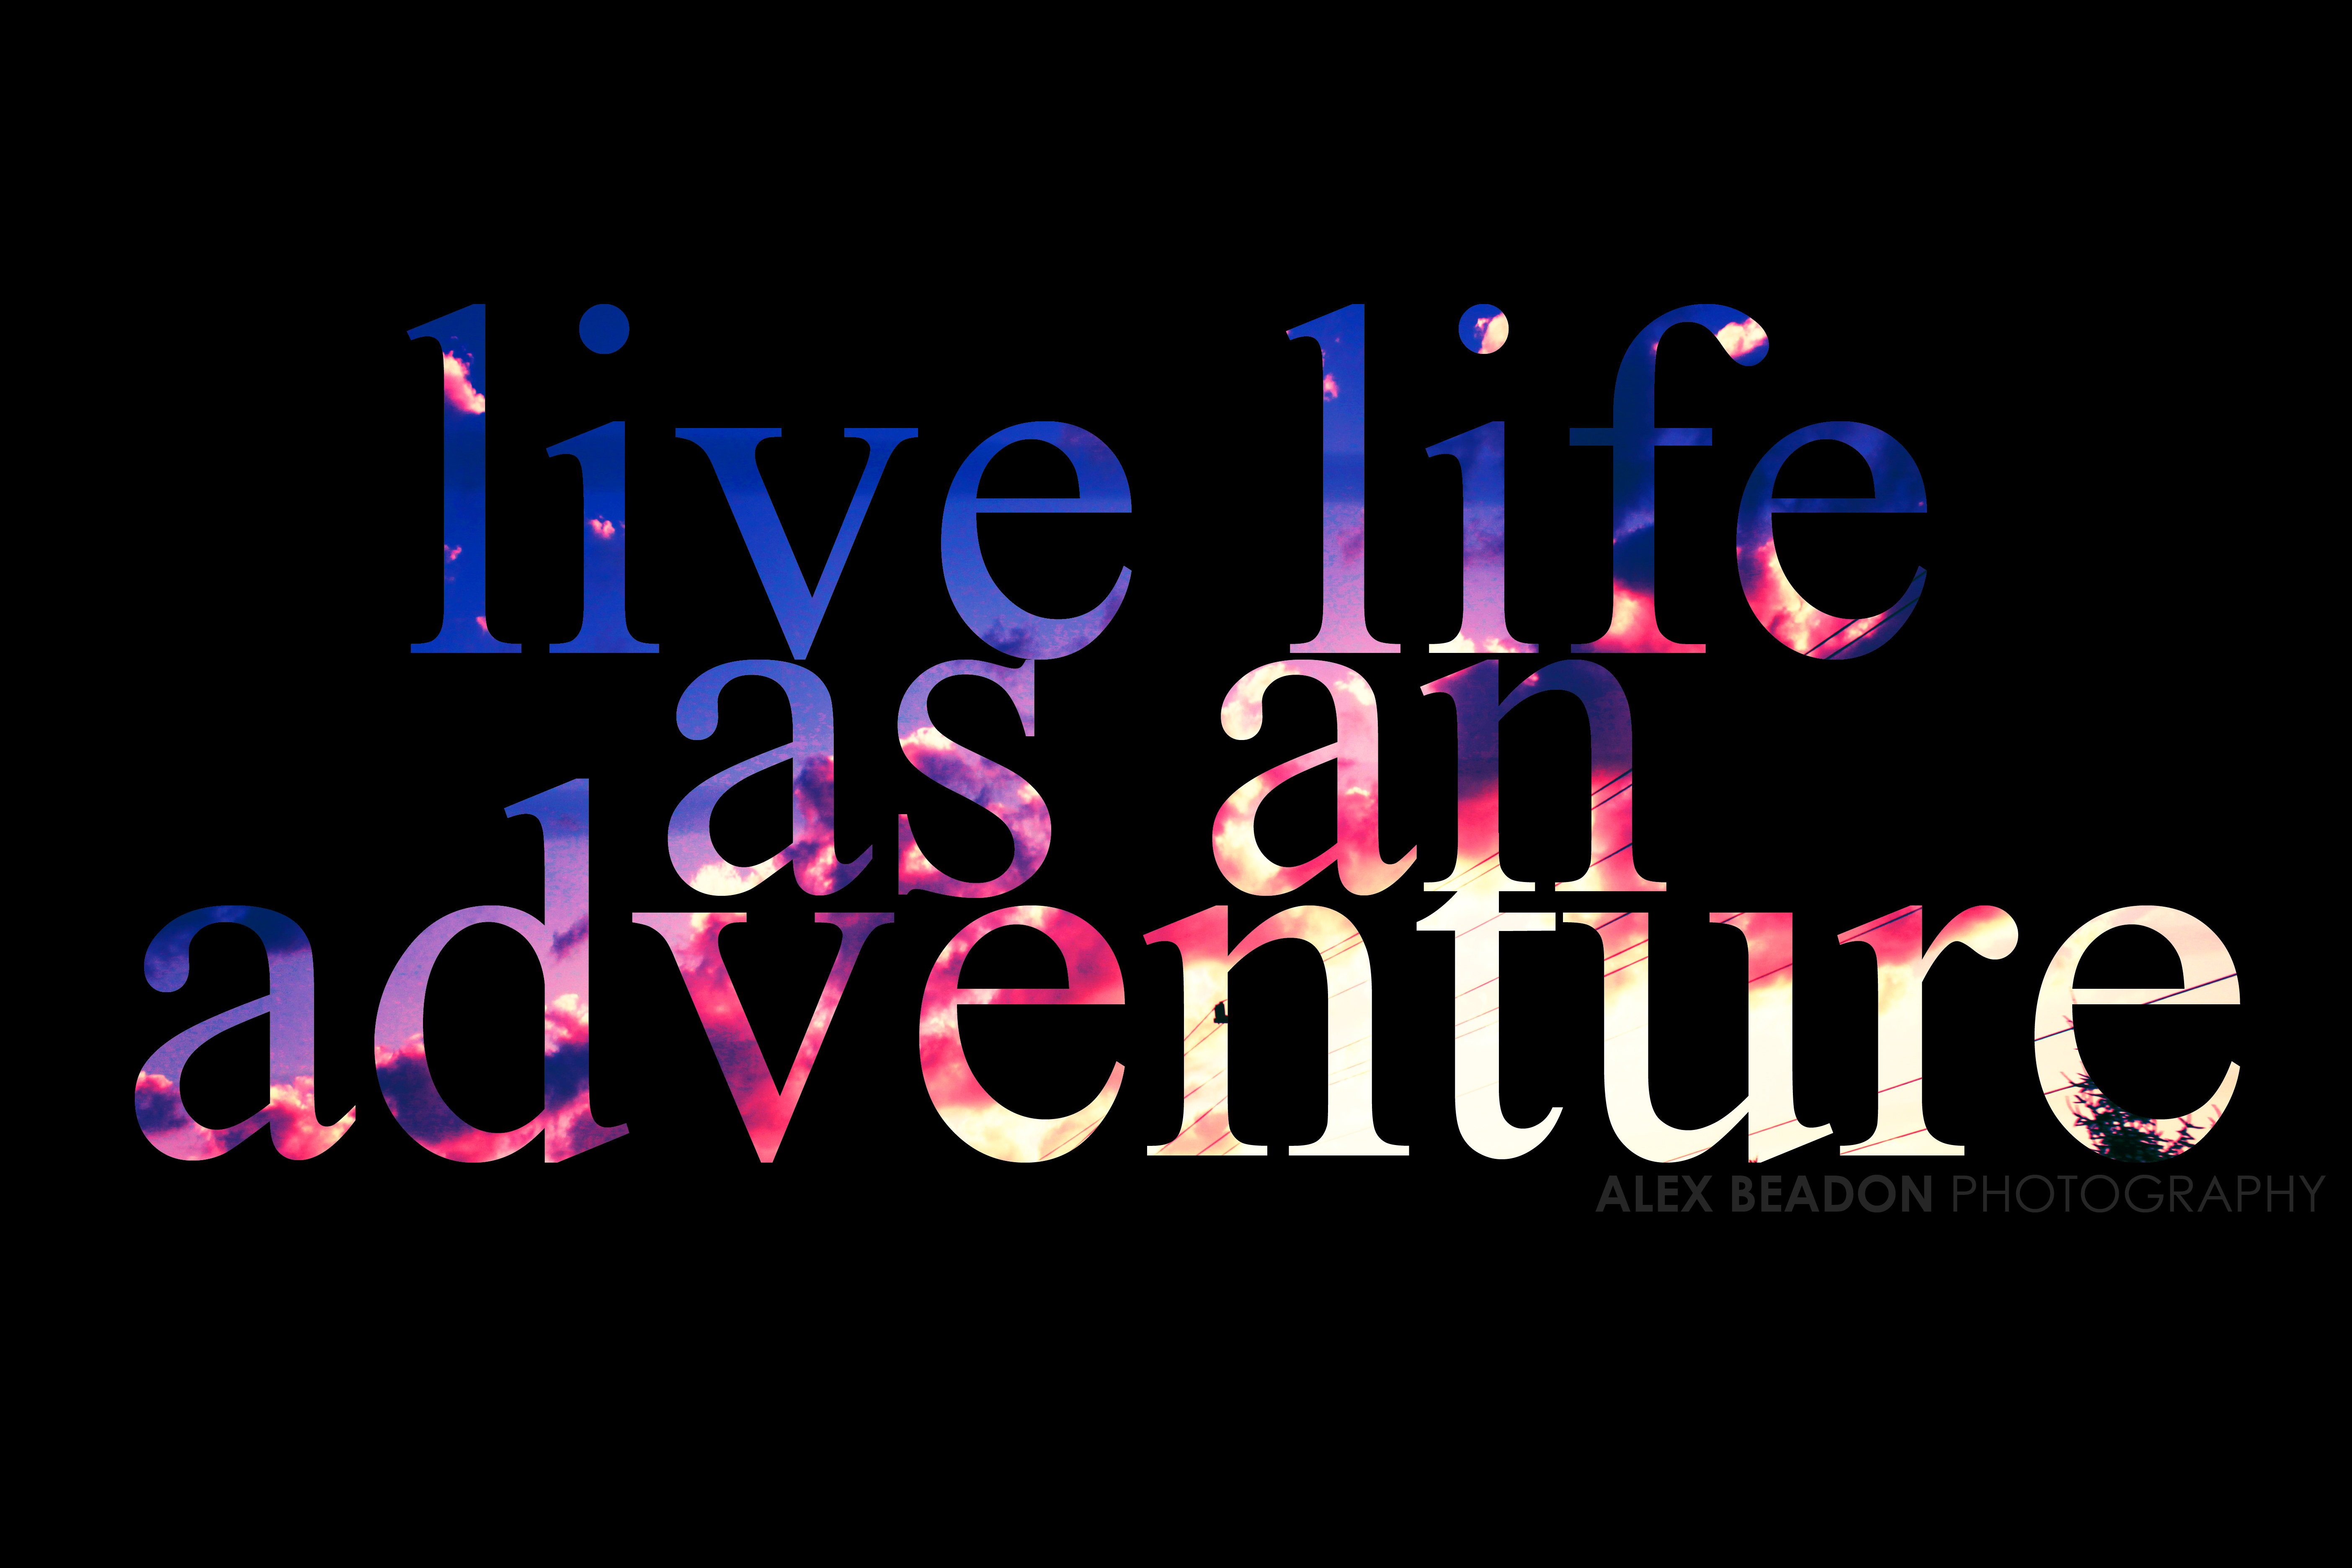 Live Life картинки. Live the Life. Live is Life. I own my life